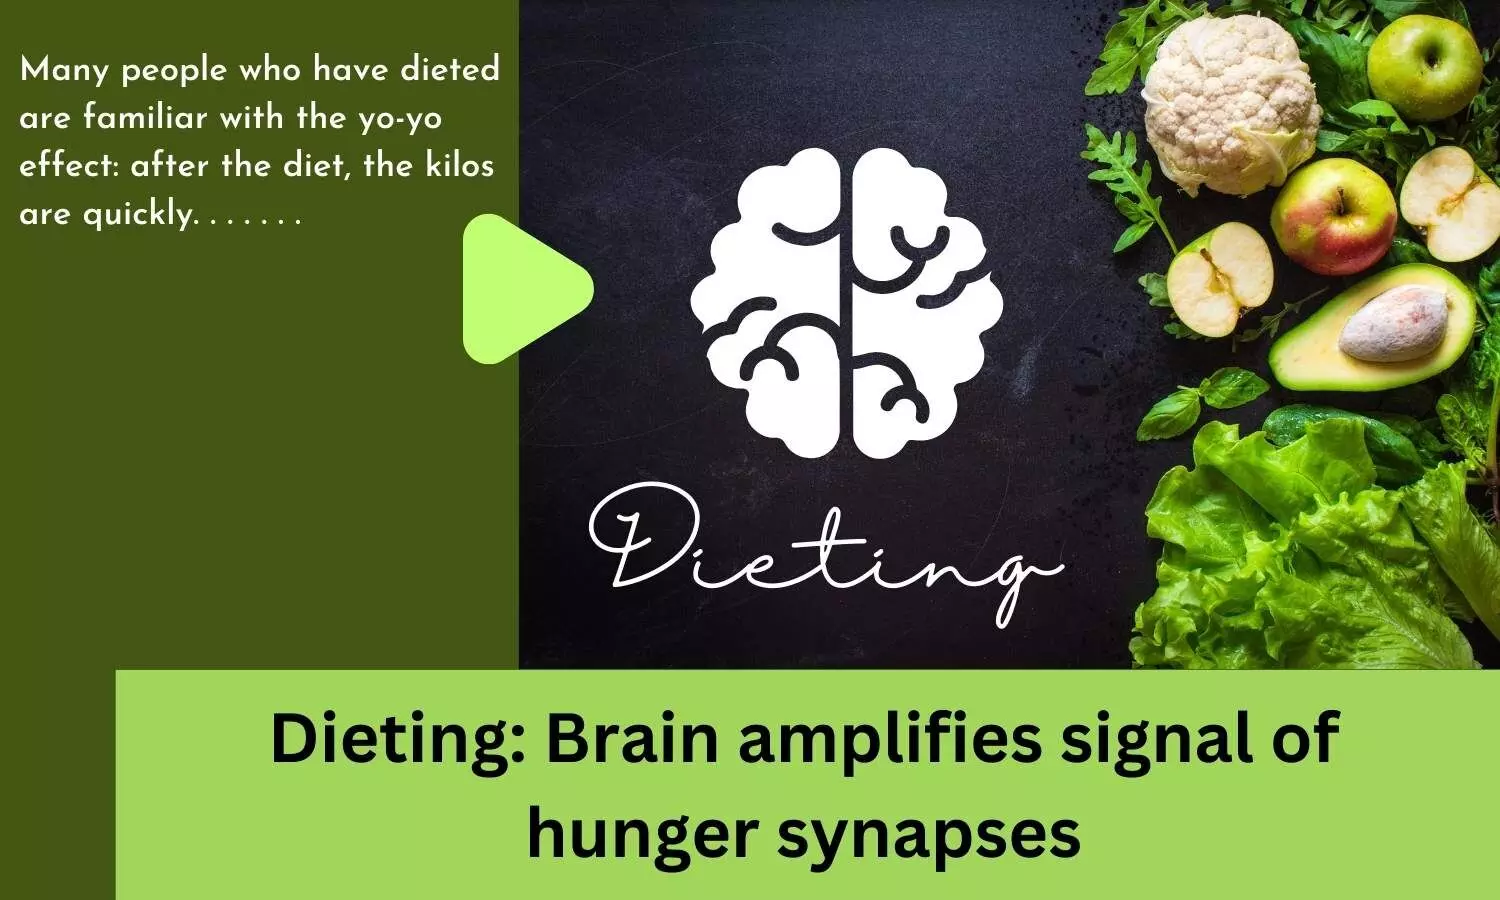 Dieting: Brain amplifies signal of hunger synapses